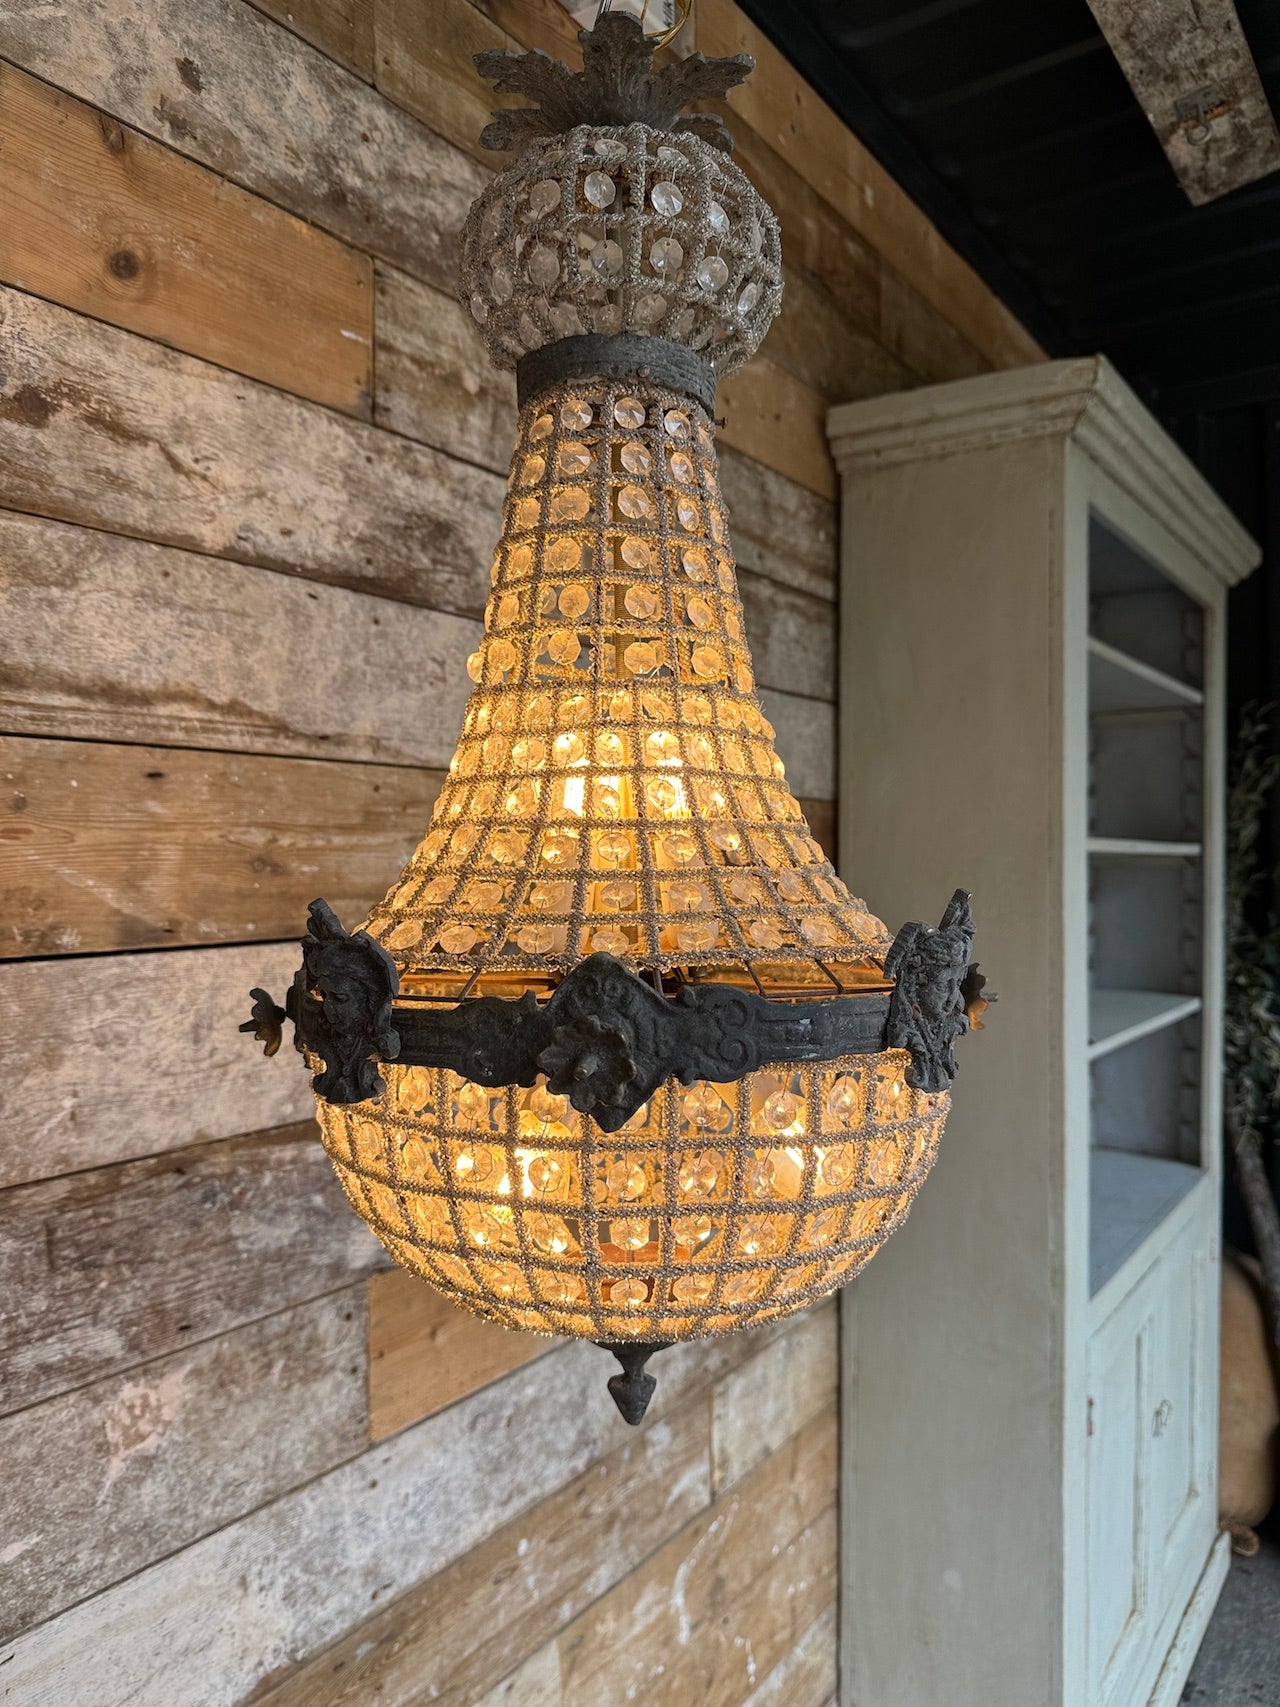 Small empire style chandelier (seconds)